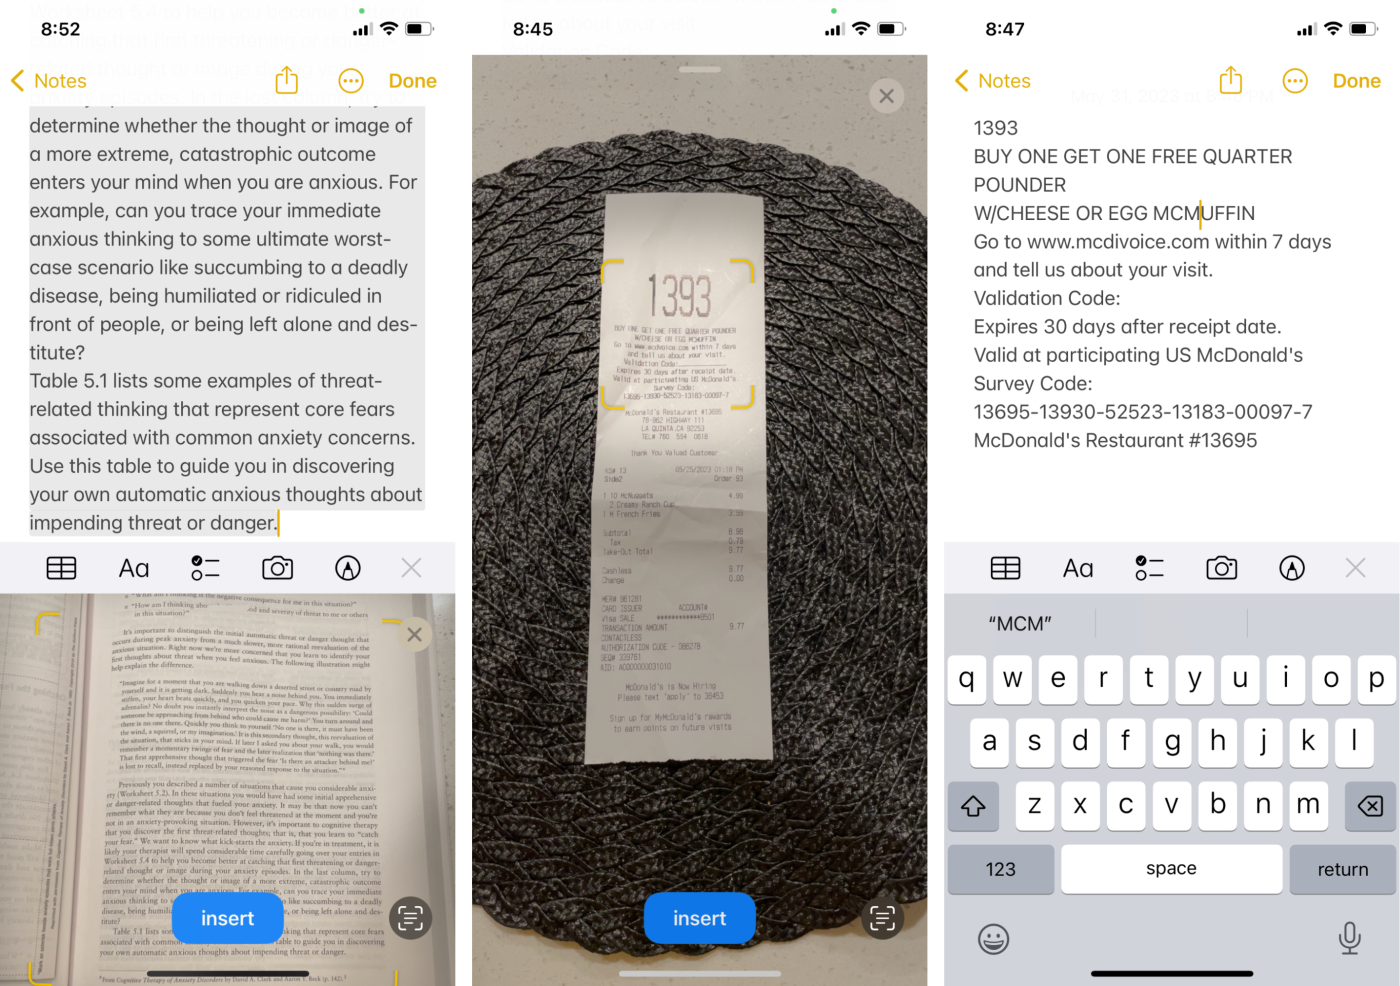 Apple Notes, our pick for the best mobile scanning app for iPhone users